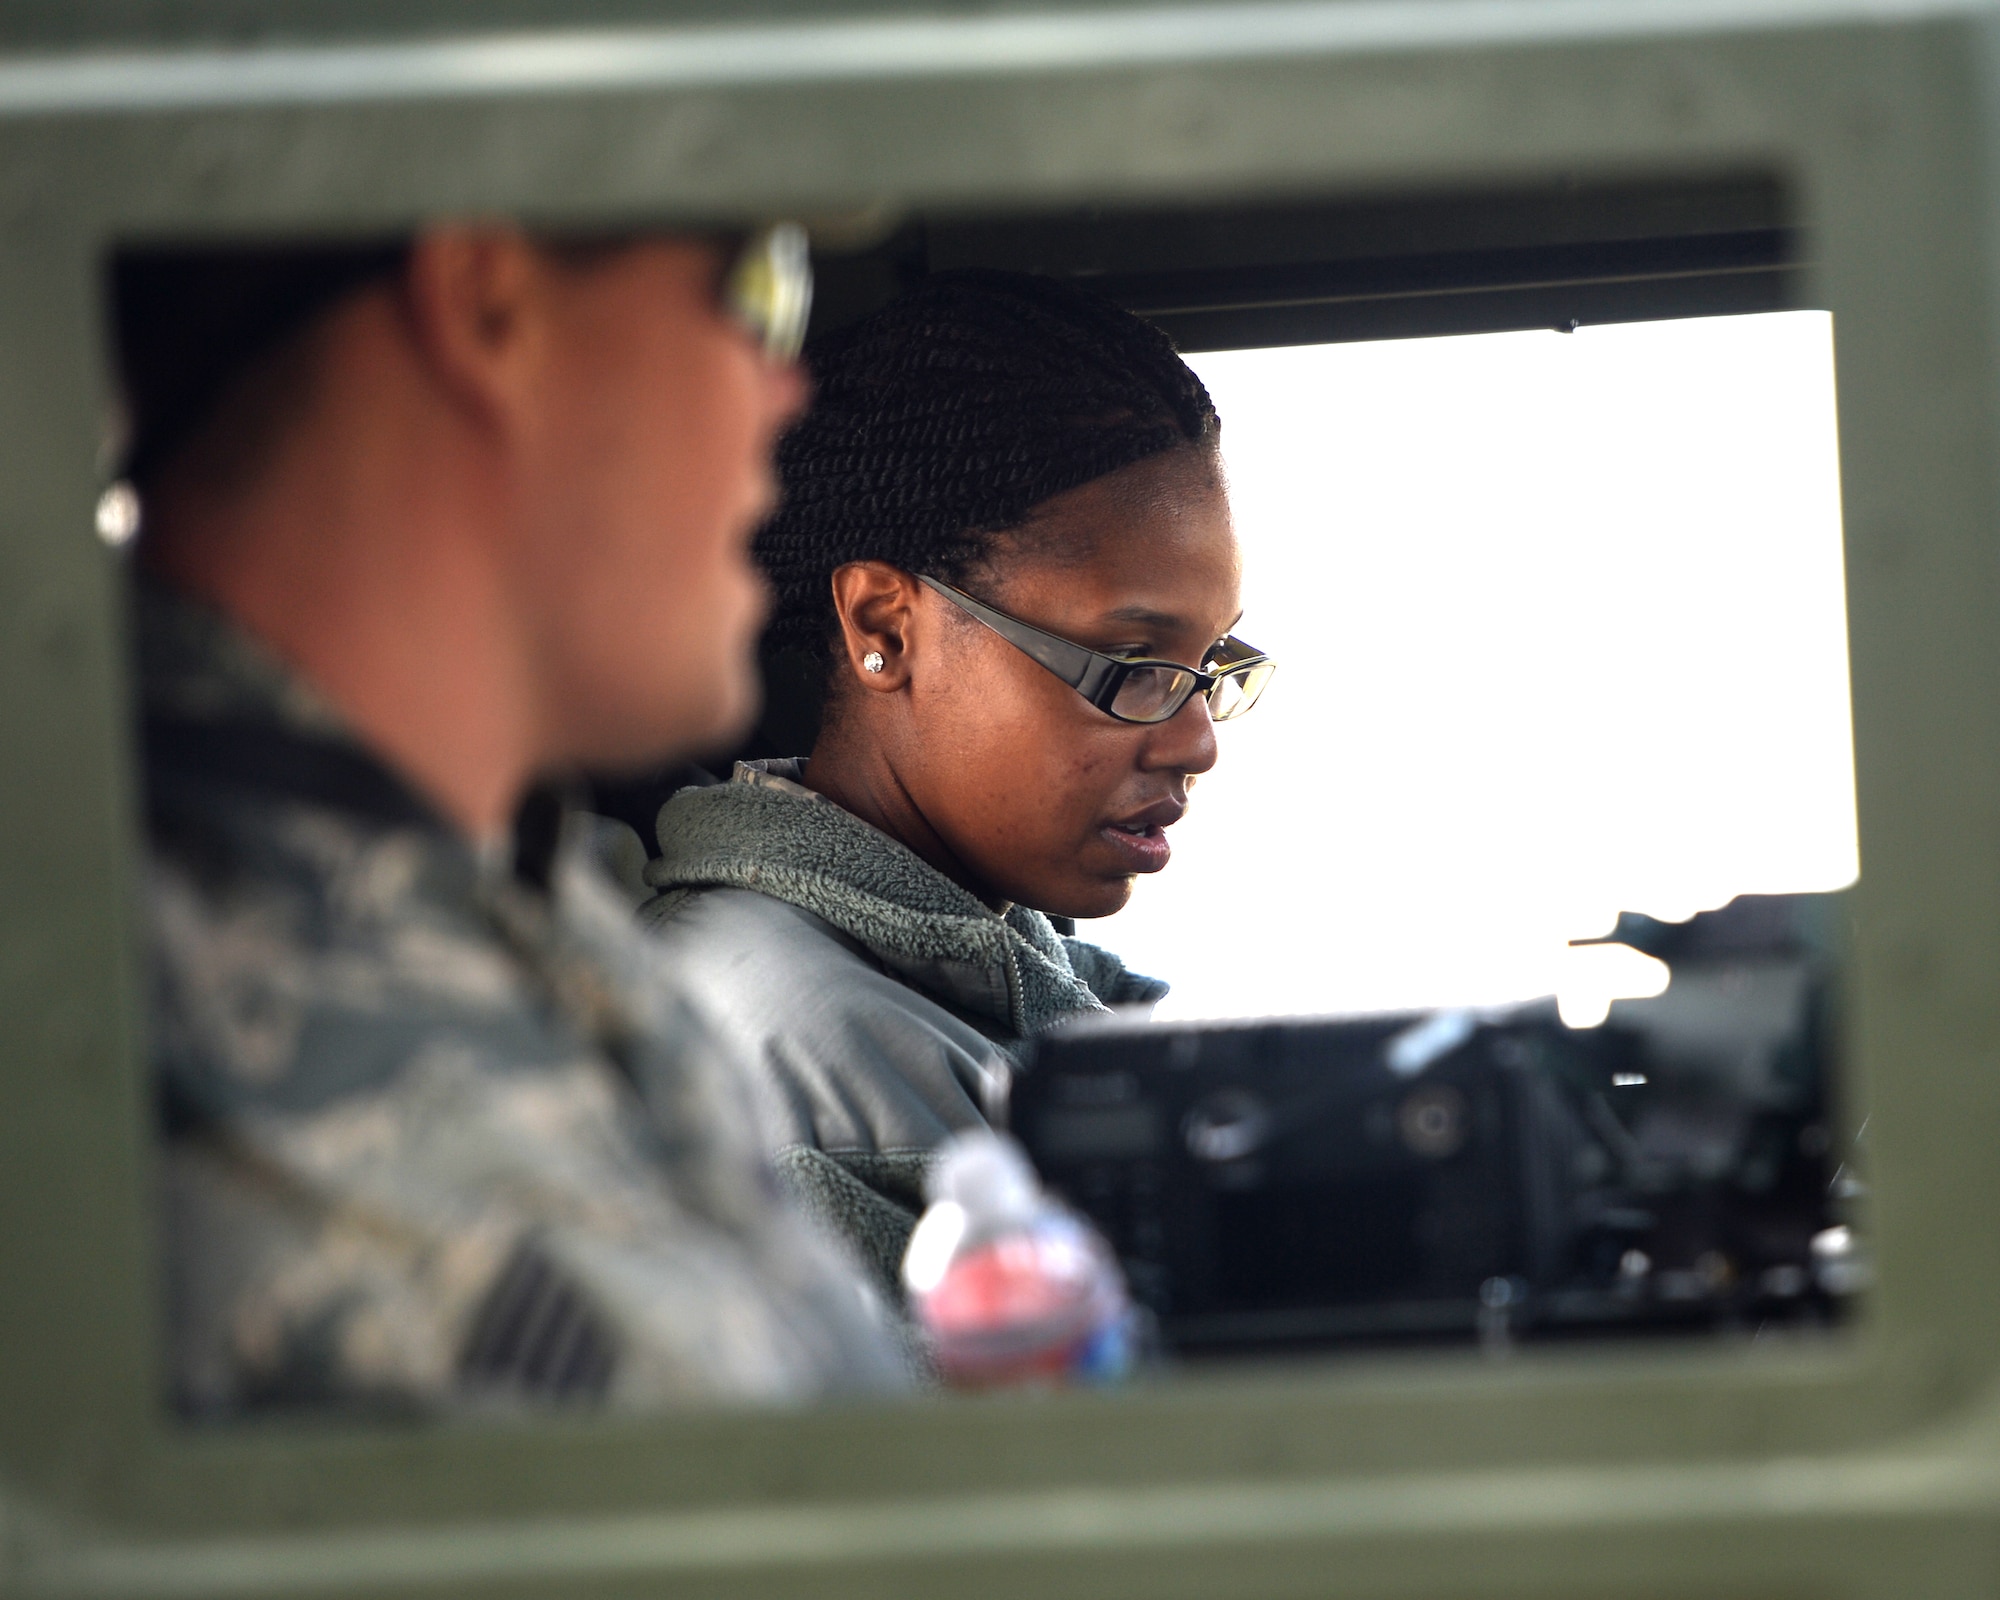 Staff Sgt. Ryan Hogue, the unit training manager with the 147th Air Support Operations Squadron, 147th Reconnaissance Wing, based at Ellington Field in Houston, Texas, trains Staff Sgt. Tyisha McNutt, a human resources assistant from the squadron, on driving a HUMVEE during a field training exercise April 4, 2014, at Camp Swift in Bastrop, Texas. The support personnel participated in the annual exercise to test the requirements necessitated by being members of an ASOS unit.